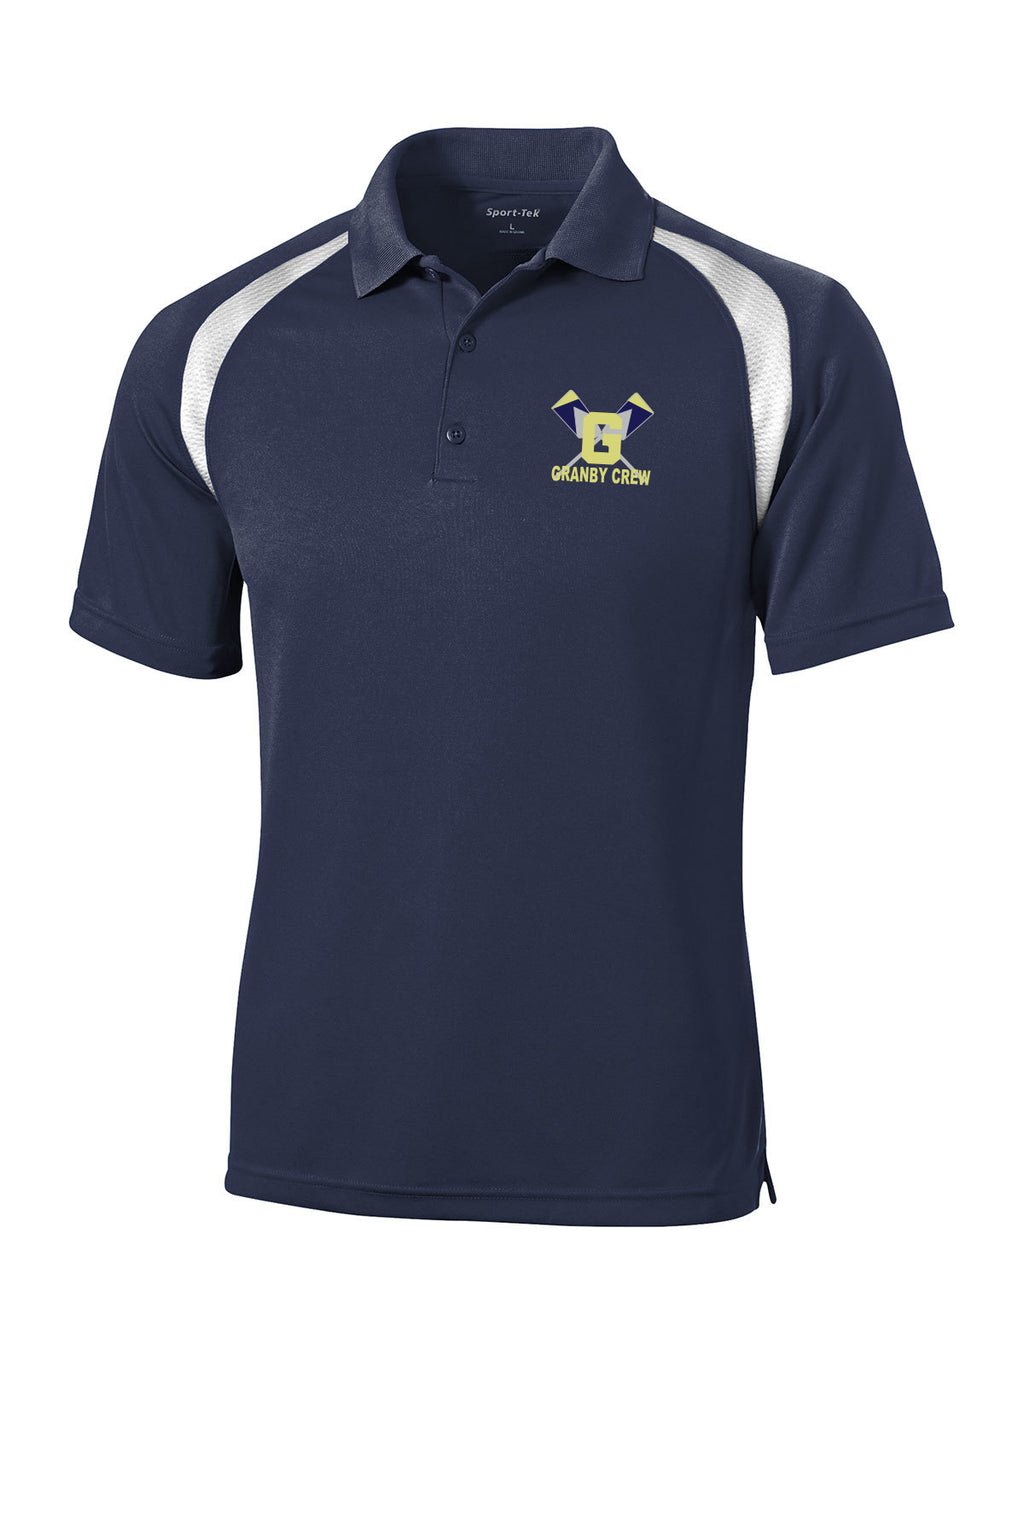 Granby Crew Embroidered Performance Men's Polo